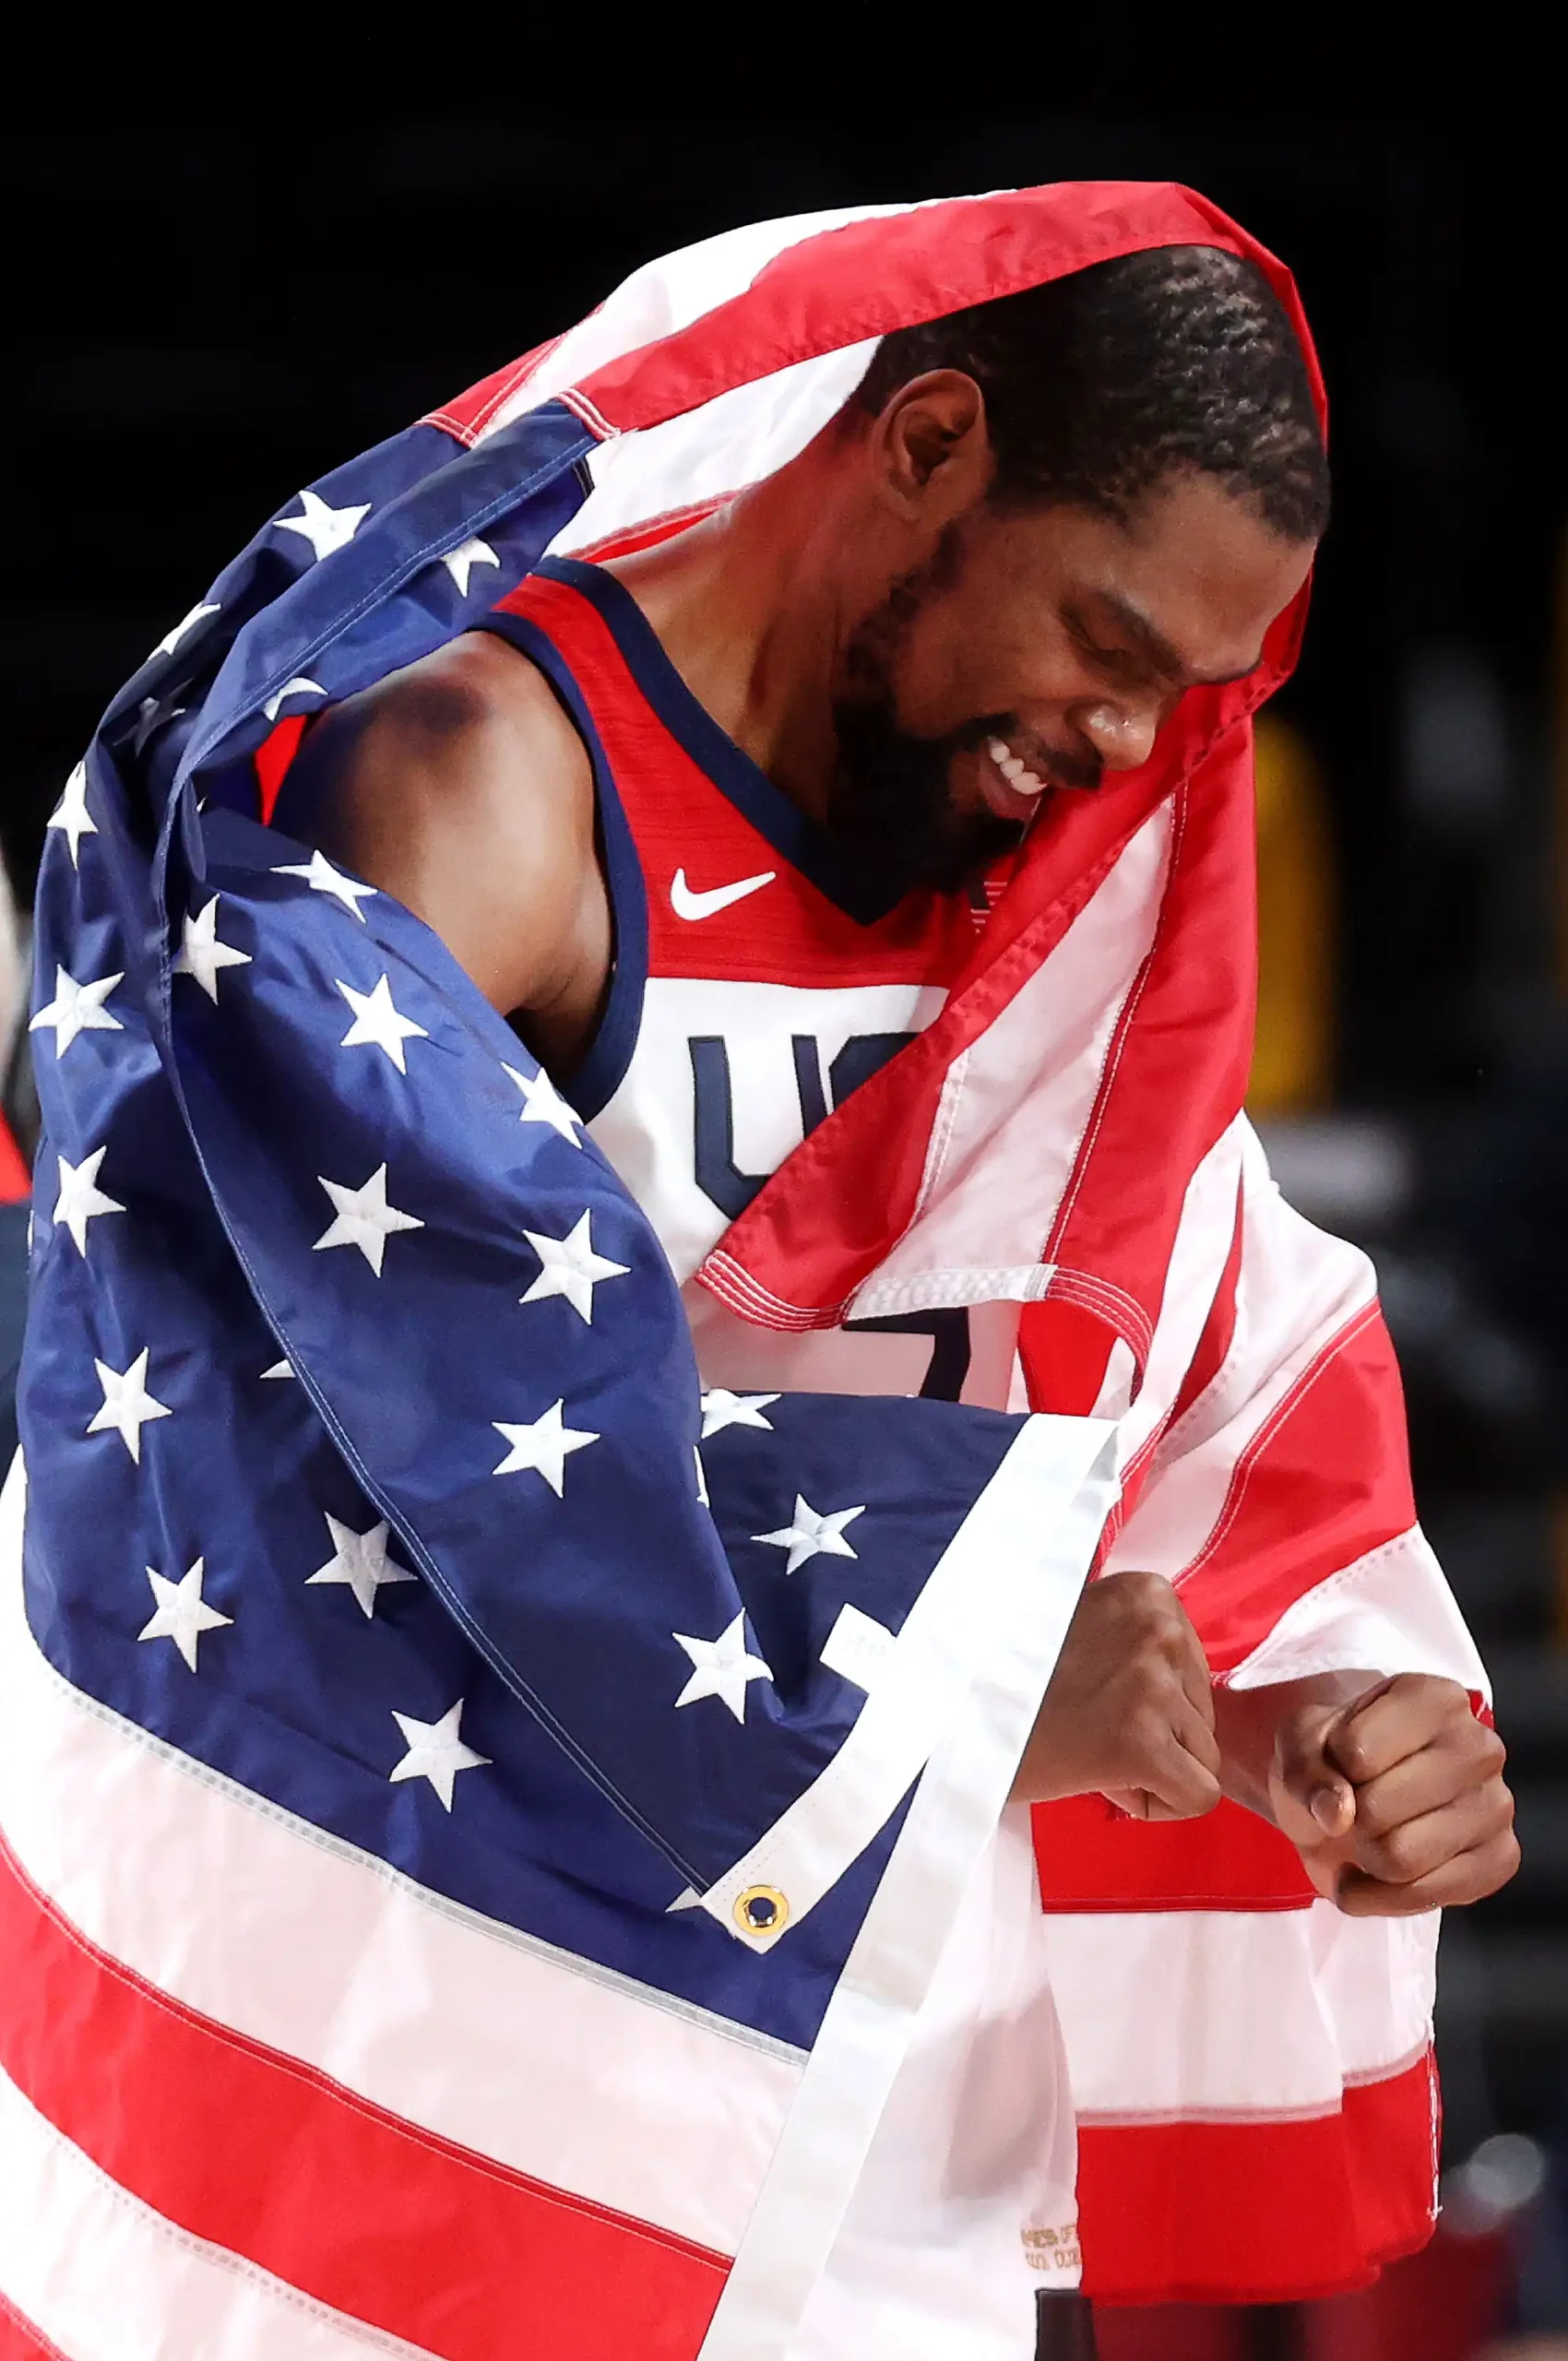 Kevin Durant #7 of Team United States celebrates following the United States' victory over France in the Men's Basketball Finals game on day fifteen of the Tokyo 2020 Olympic Games at Saitama Super Arena on August 07, 2021 in Saitama, Japan.